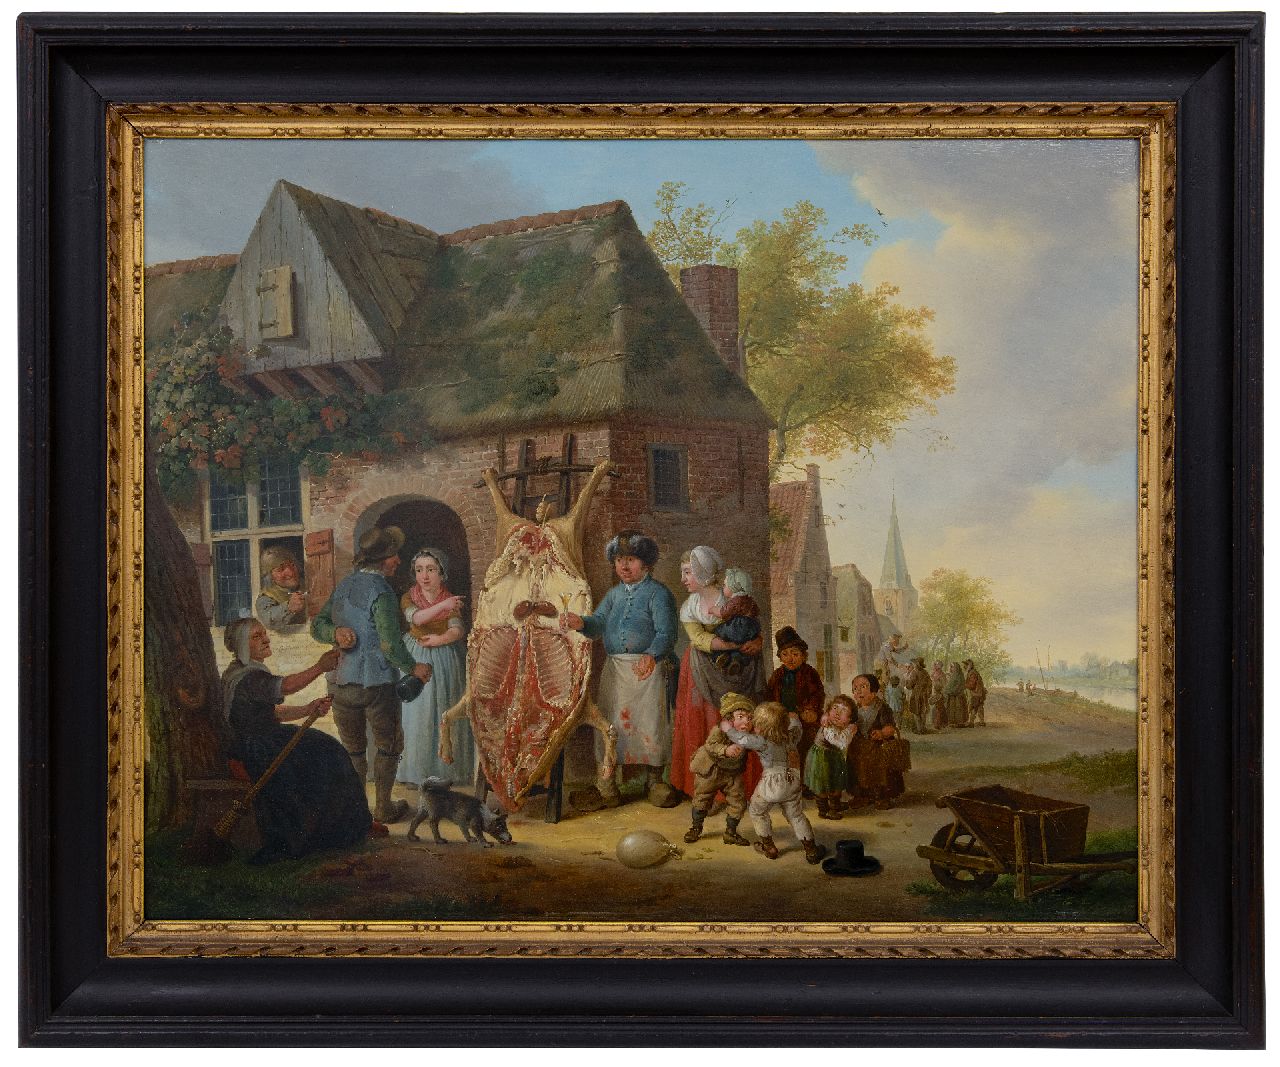 Cuylenburgh (II) C. van | Cornelis van Cuylenburgh (II) | Paintings offered for sale | Village scene, after the slaughter of the pig, oil on panel 49.7 x 64.0 cm, signed c.l. and dated 1797